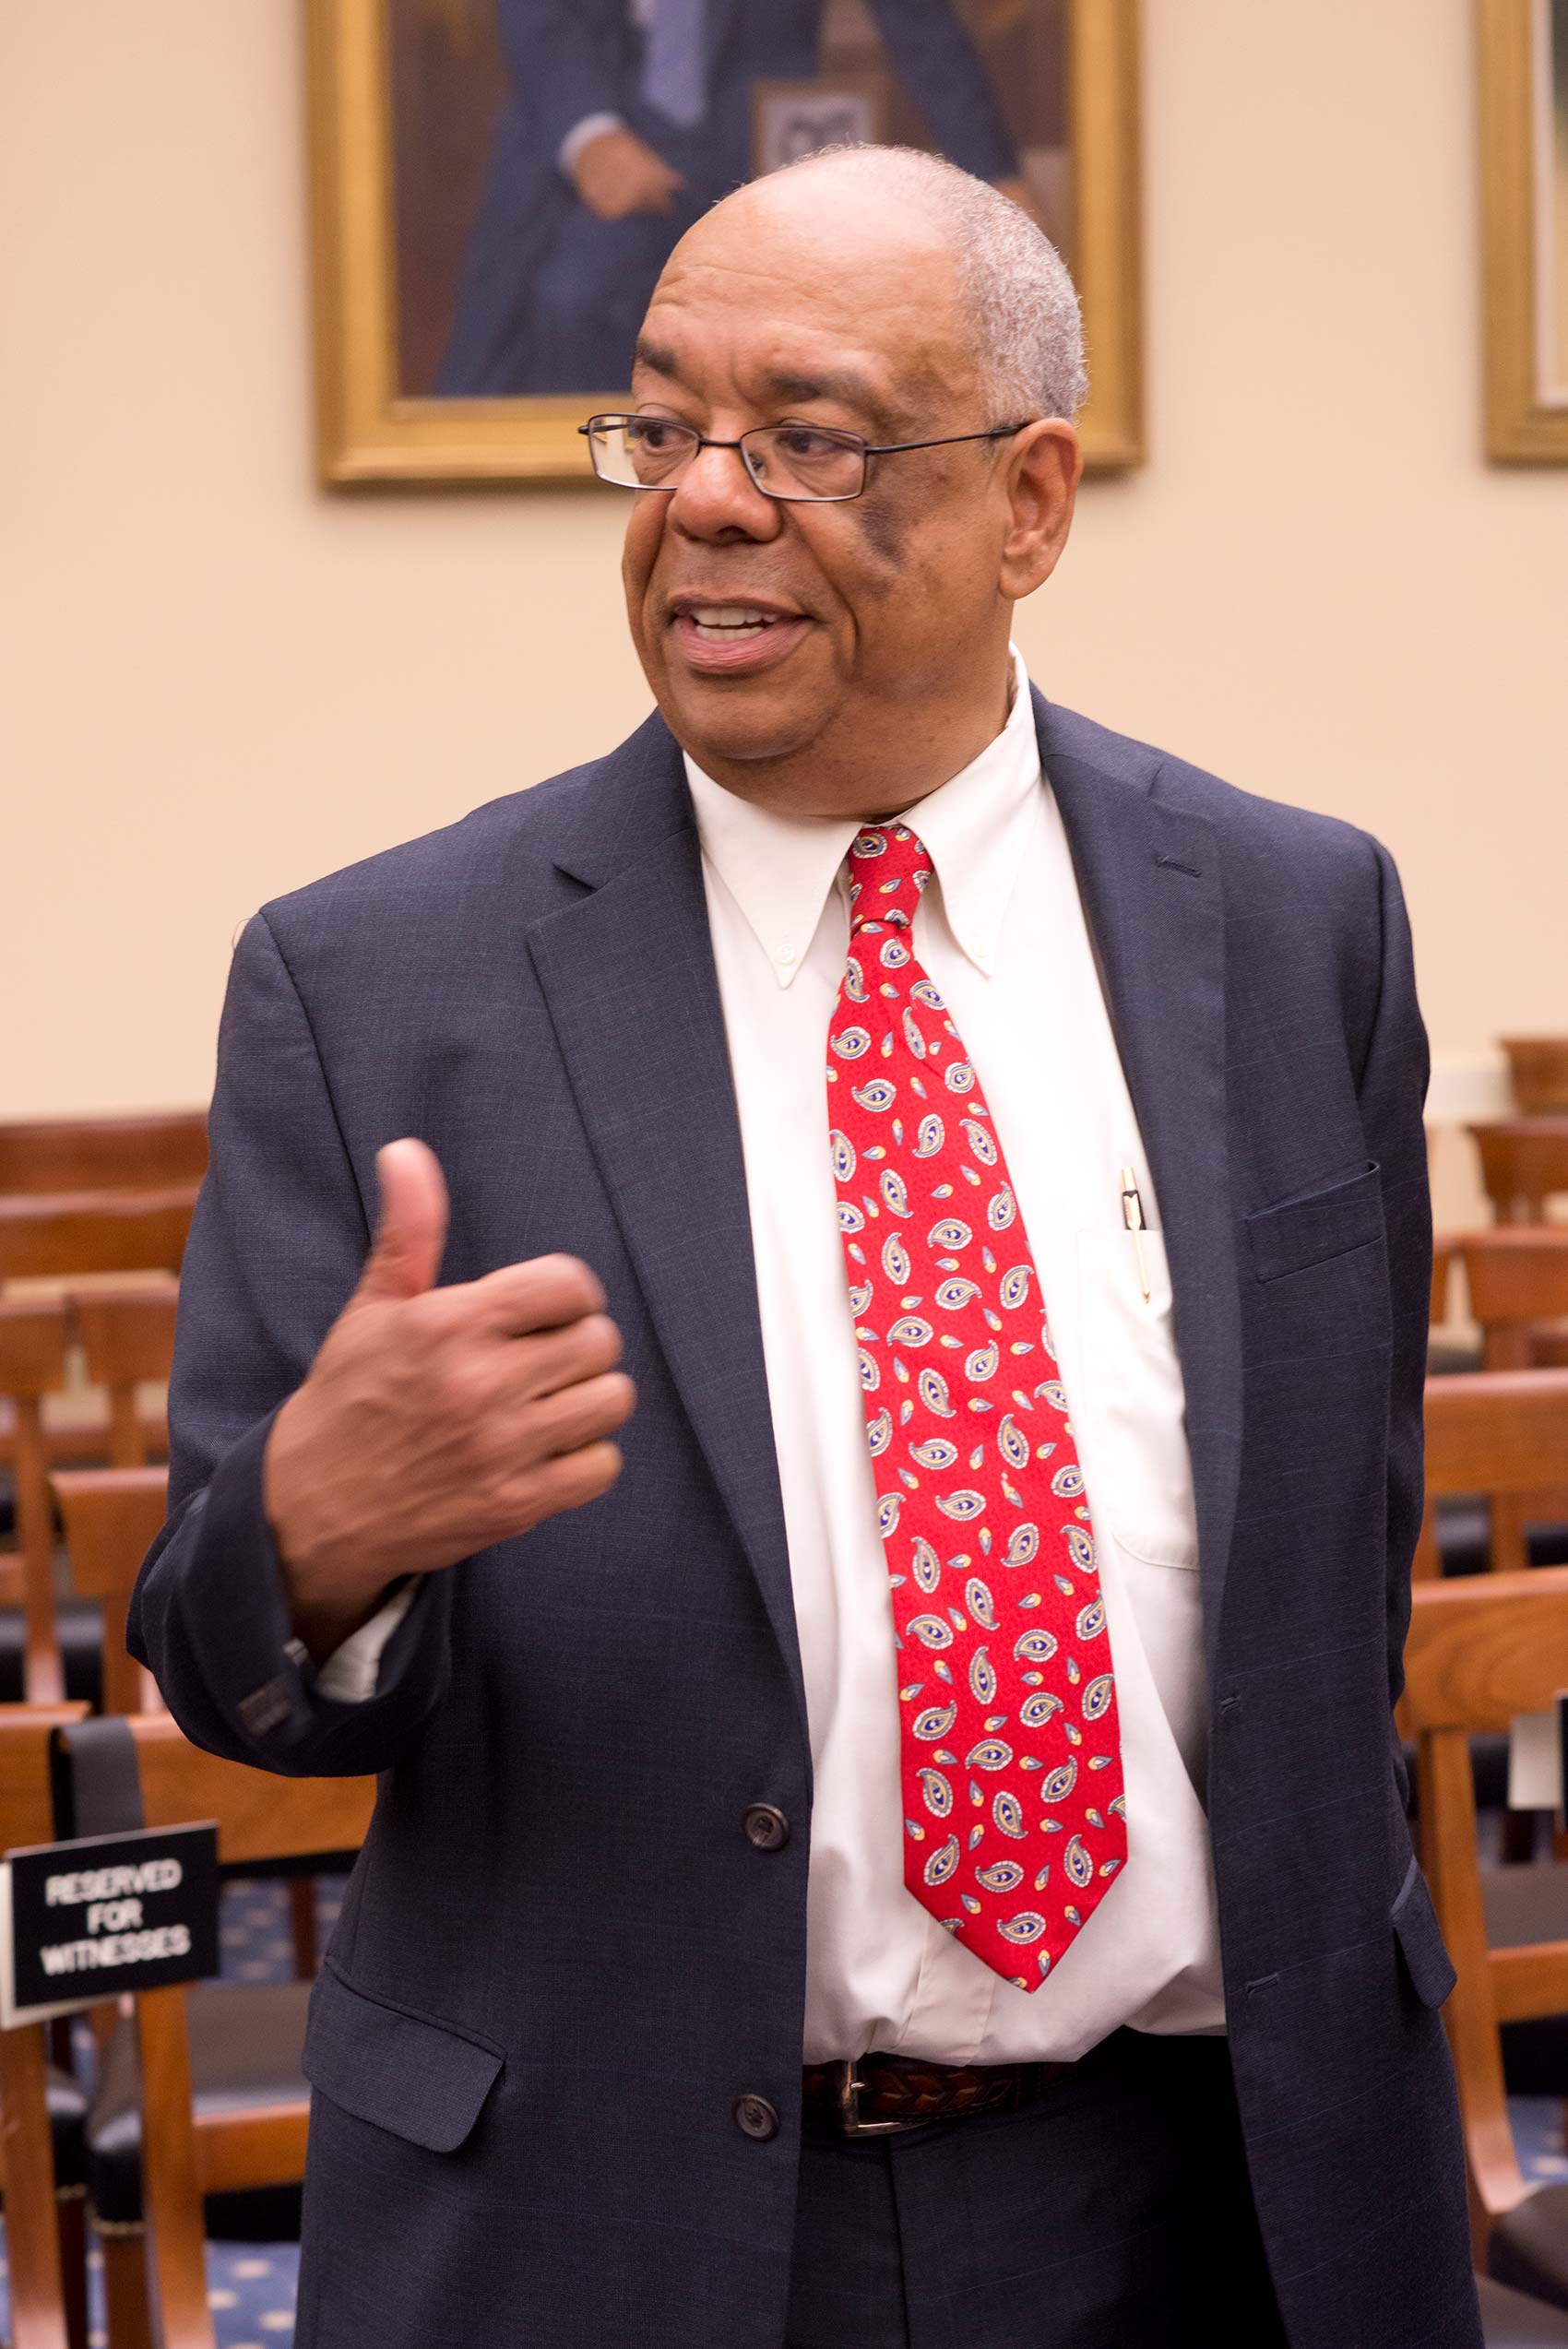 Roscoe Giles in a congressional hearing room after testifying before congress.